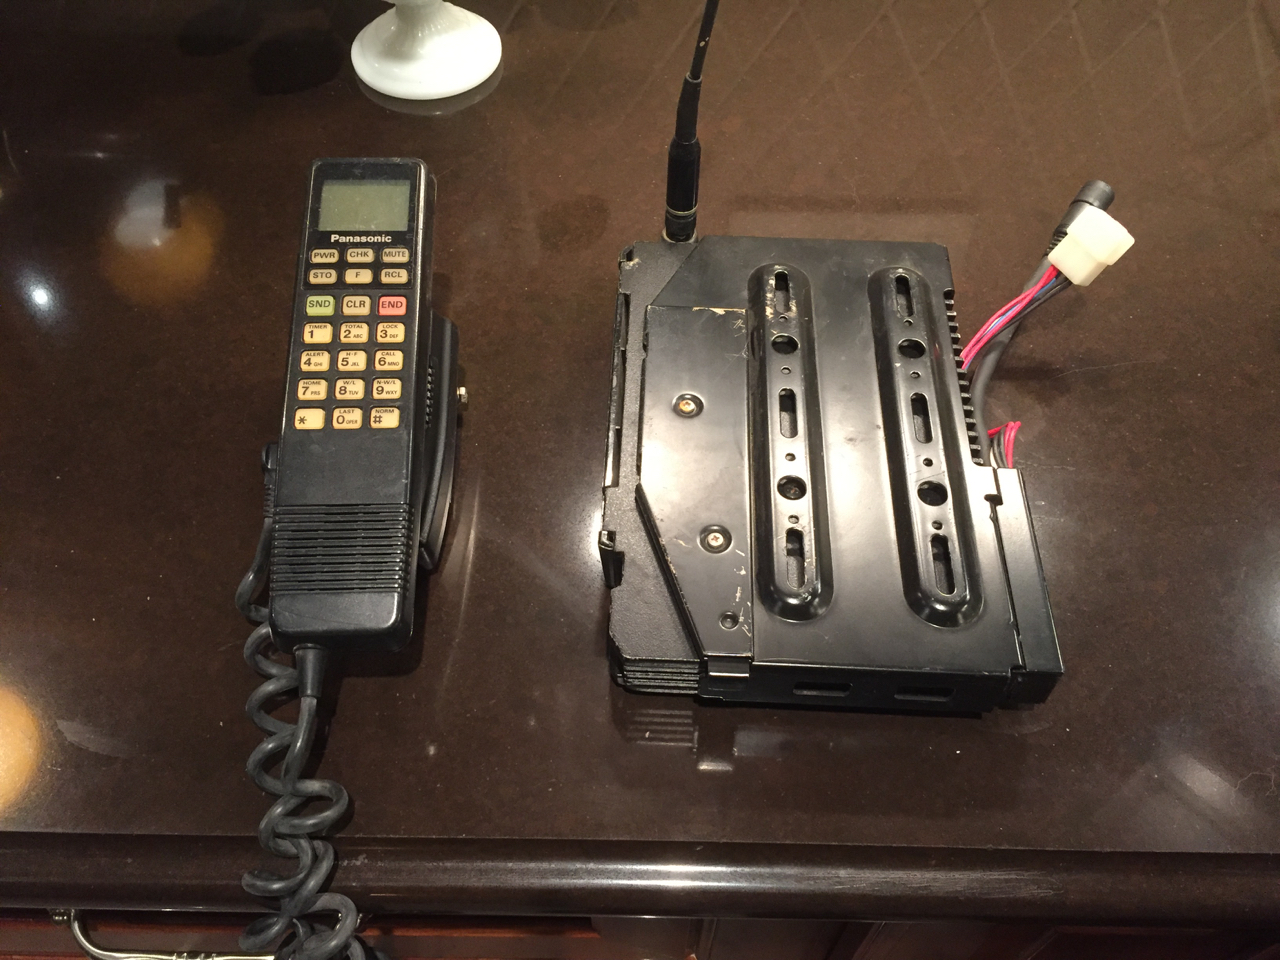 Panasonic EJB-114 AMPS cell phone in car kit configuration